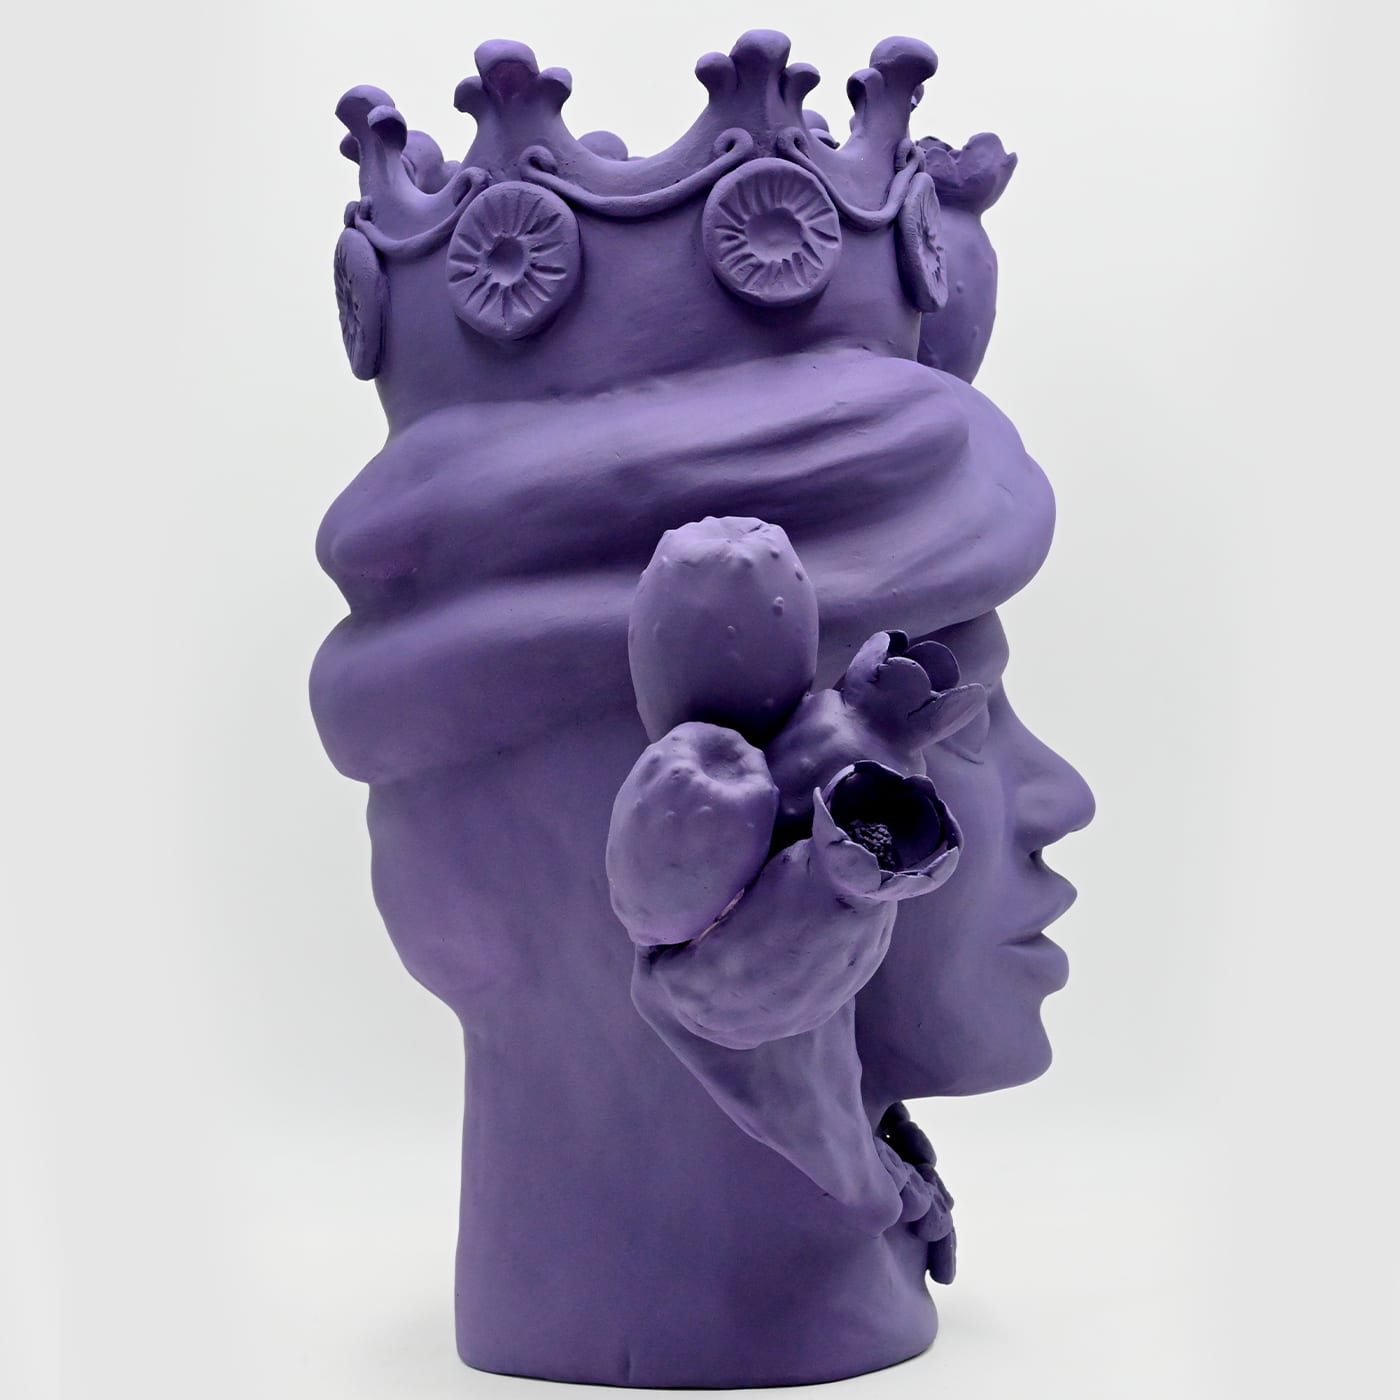 Violet Handcrafted Moor's Head Sculpture from Italy